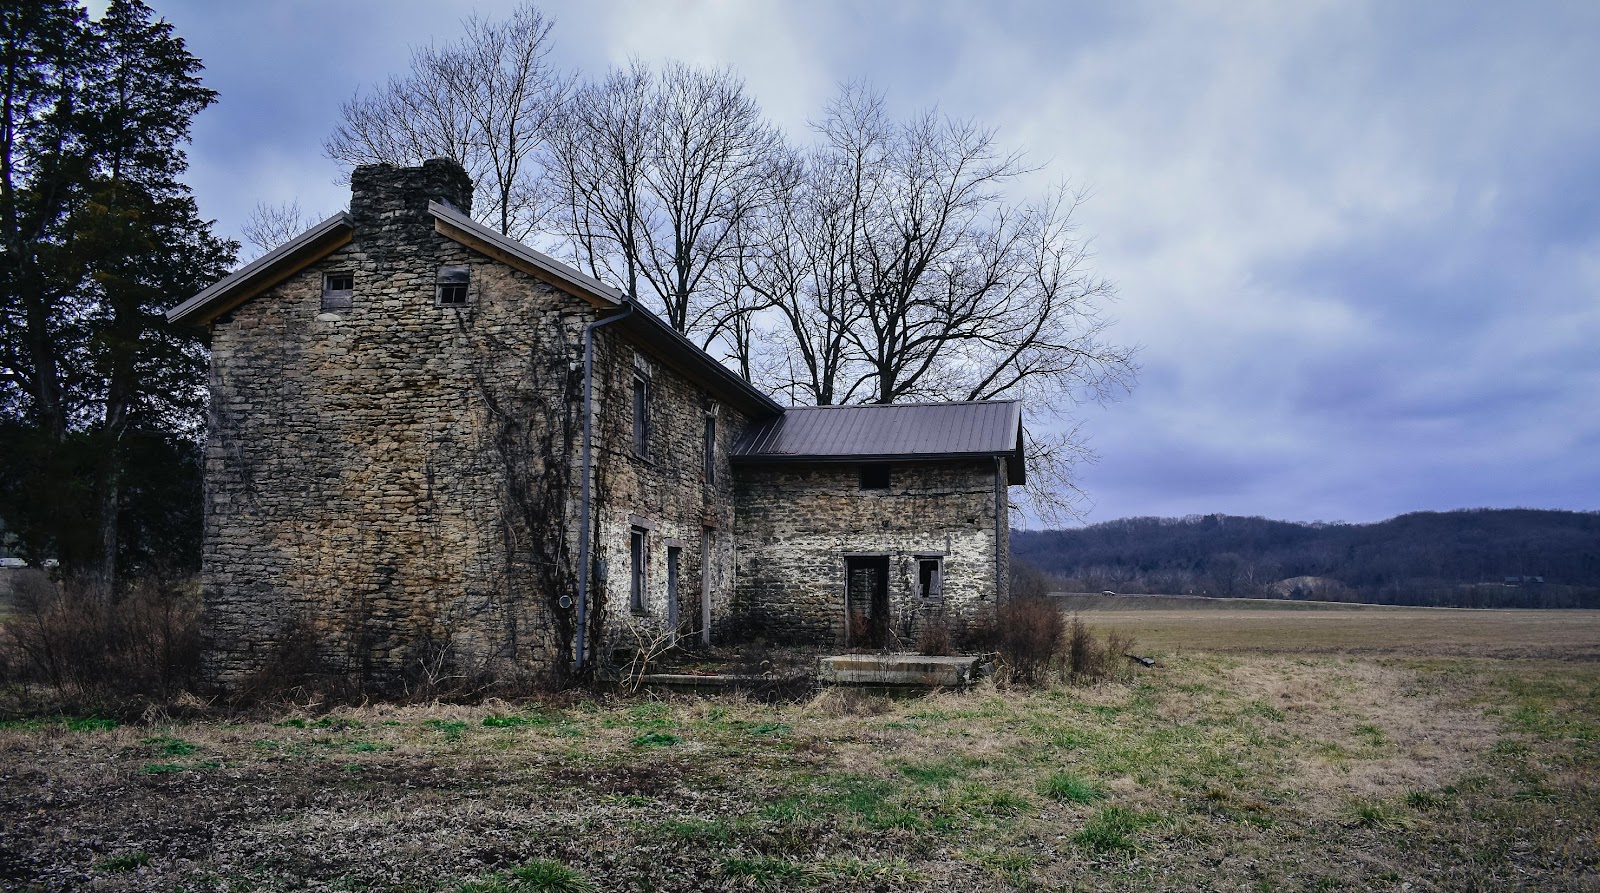 A dilapidated structure with a long history of paranormal events